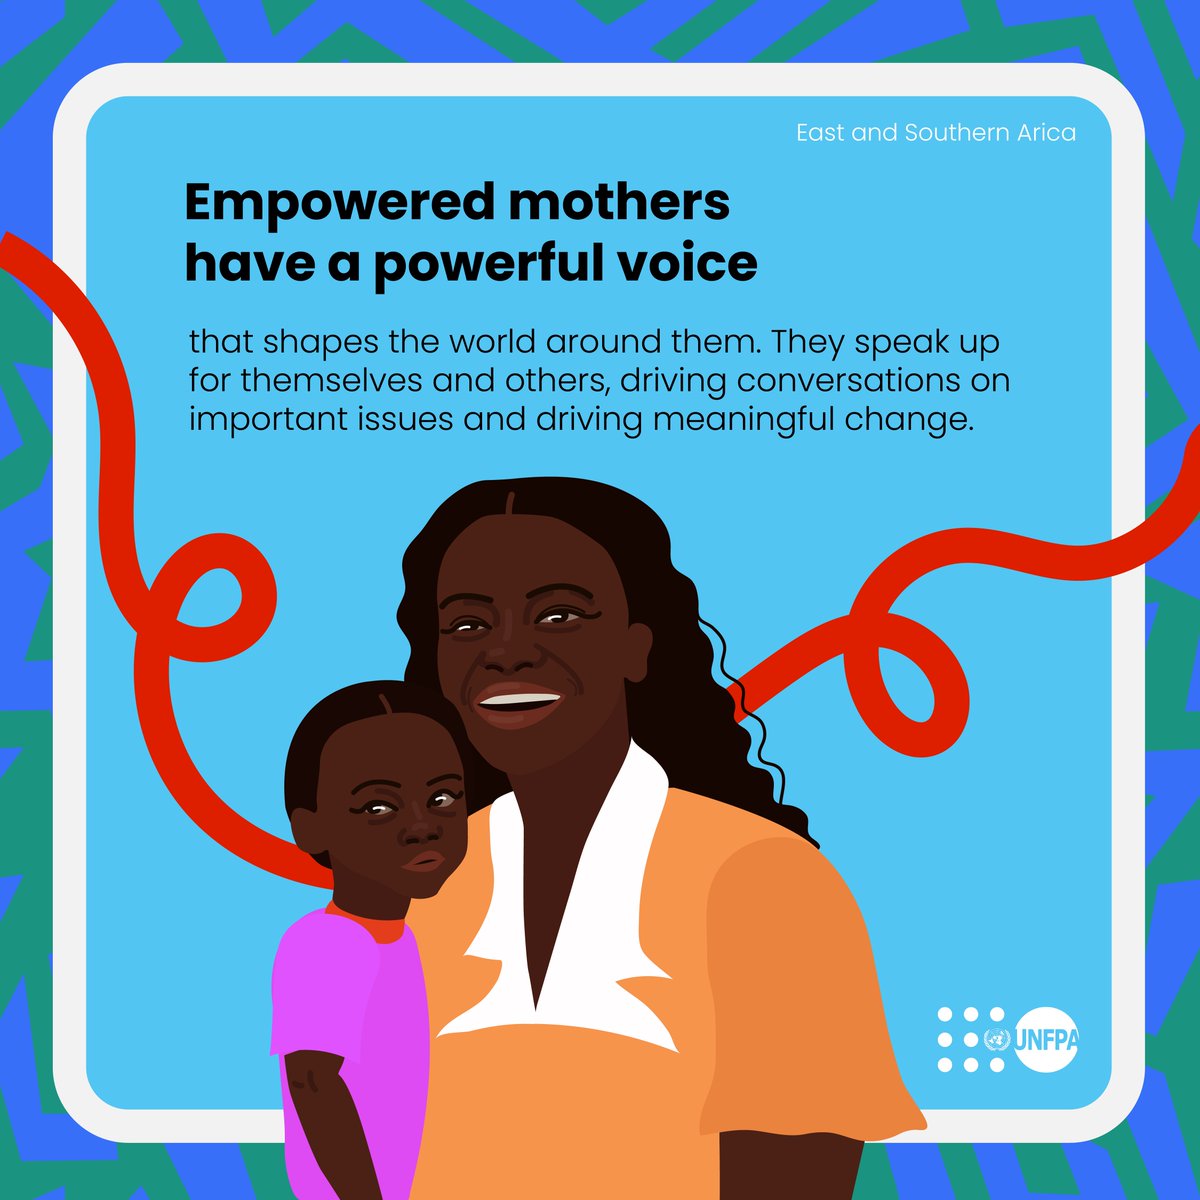 Empowered mothers 💪 have the power to shape the world with their voices. When they speak up for themselves and others, they ignite conversations and lead the charge for impactful change. Let's celebrate the strength of mothers.